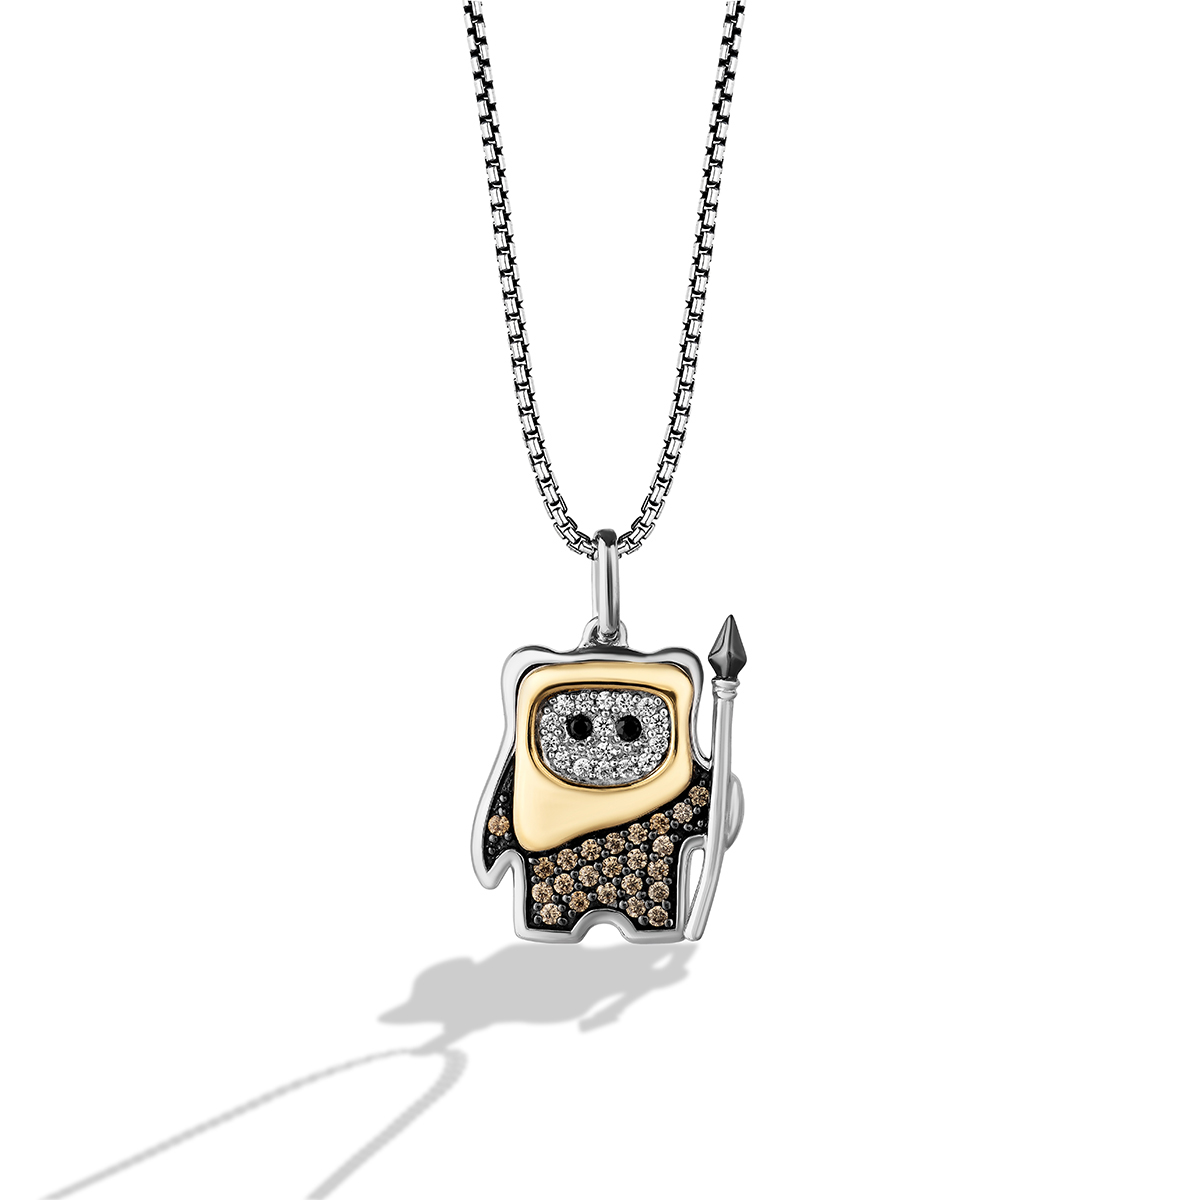 Star Wars(tm) Fine Jewelry Ewok 1/5ctw Champagne Diamond and Diamond Two-Tone Pendant Necklace | Galactic Beings